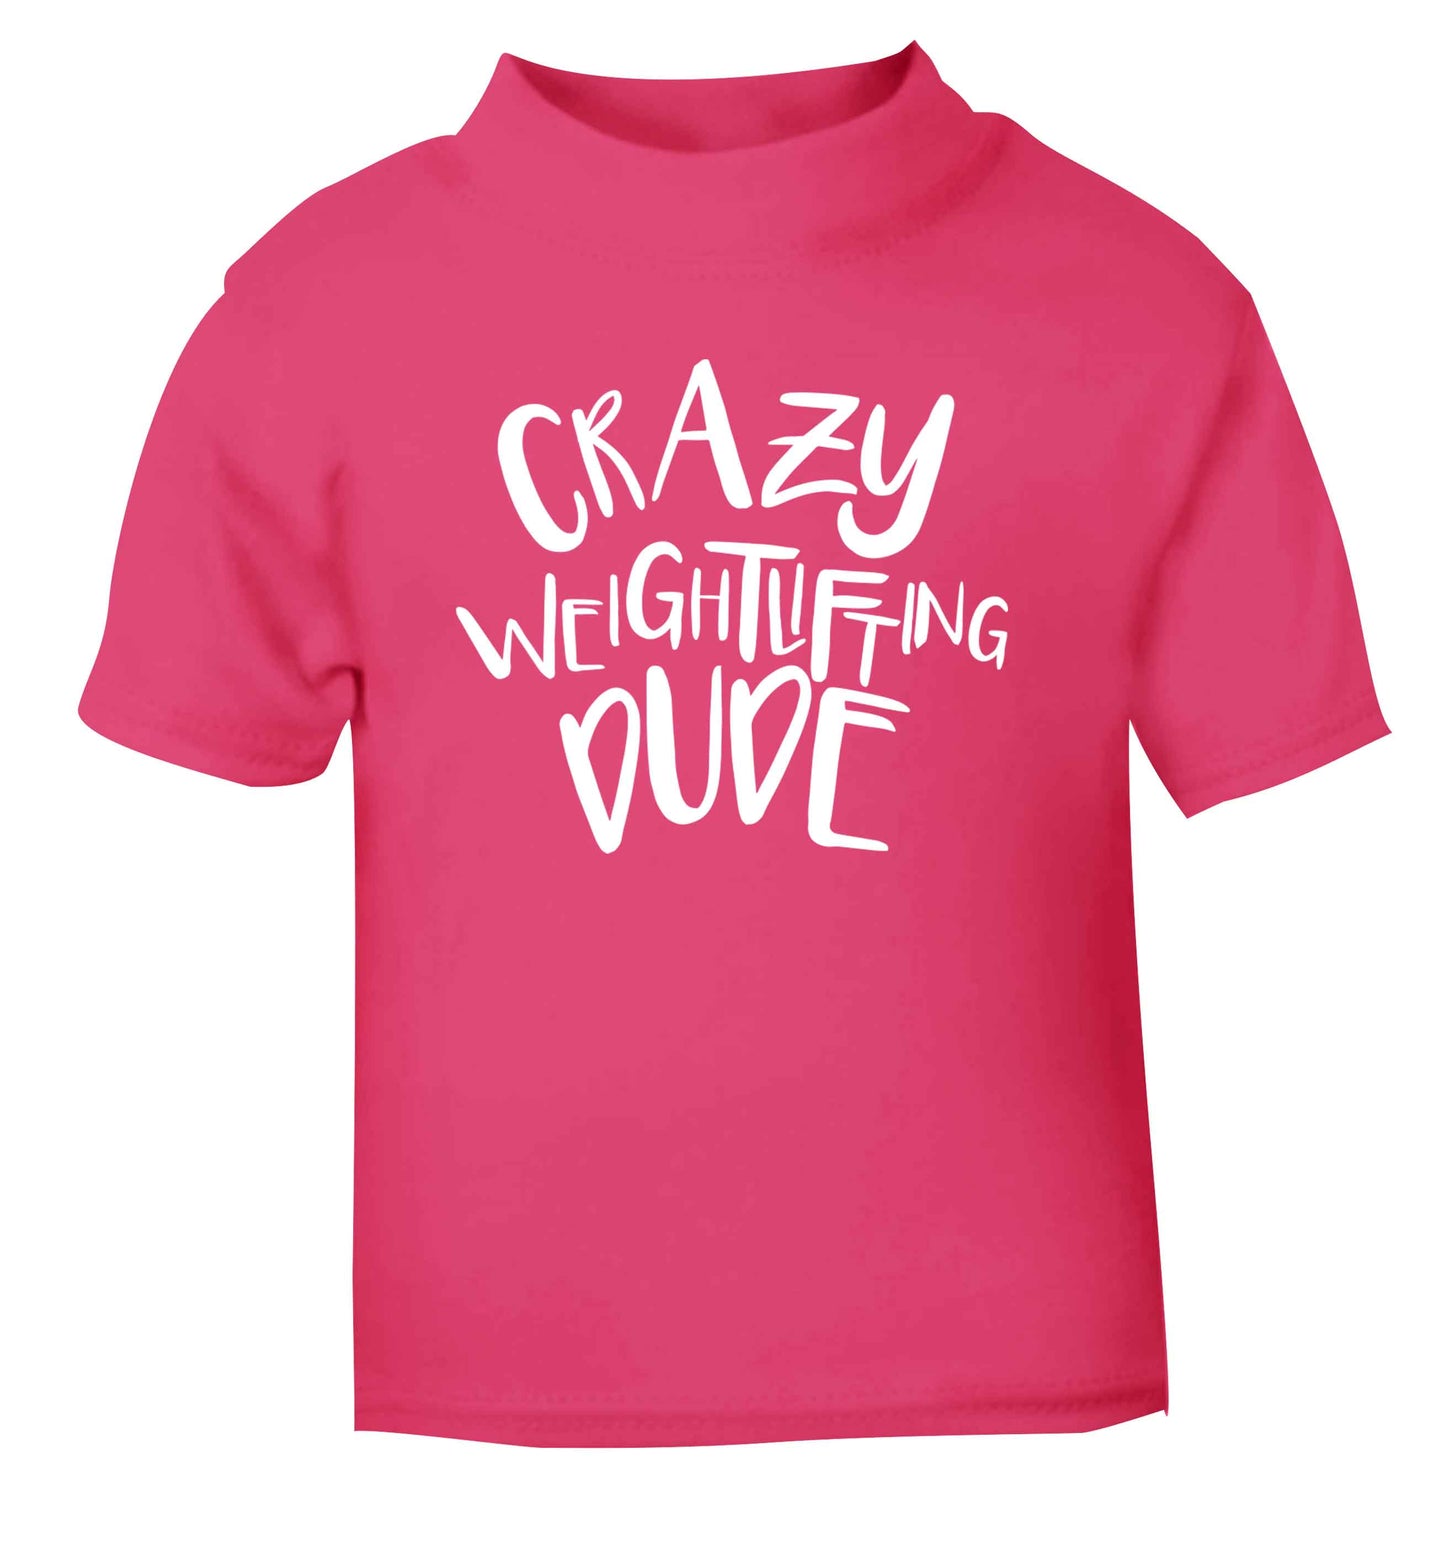 Crazy weightlifting dude pink Baby Toddler Tshirt 2 Years